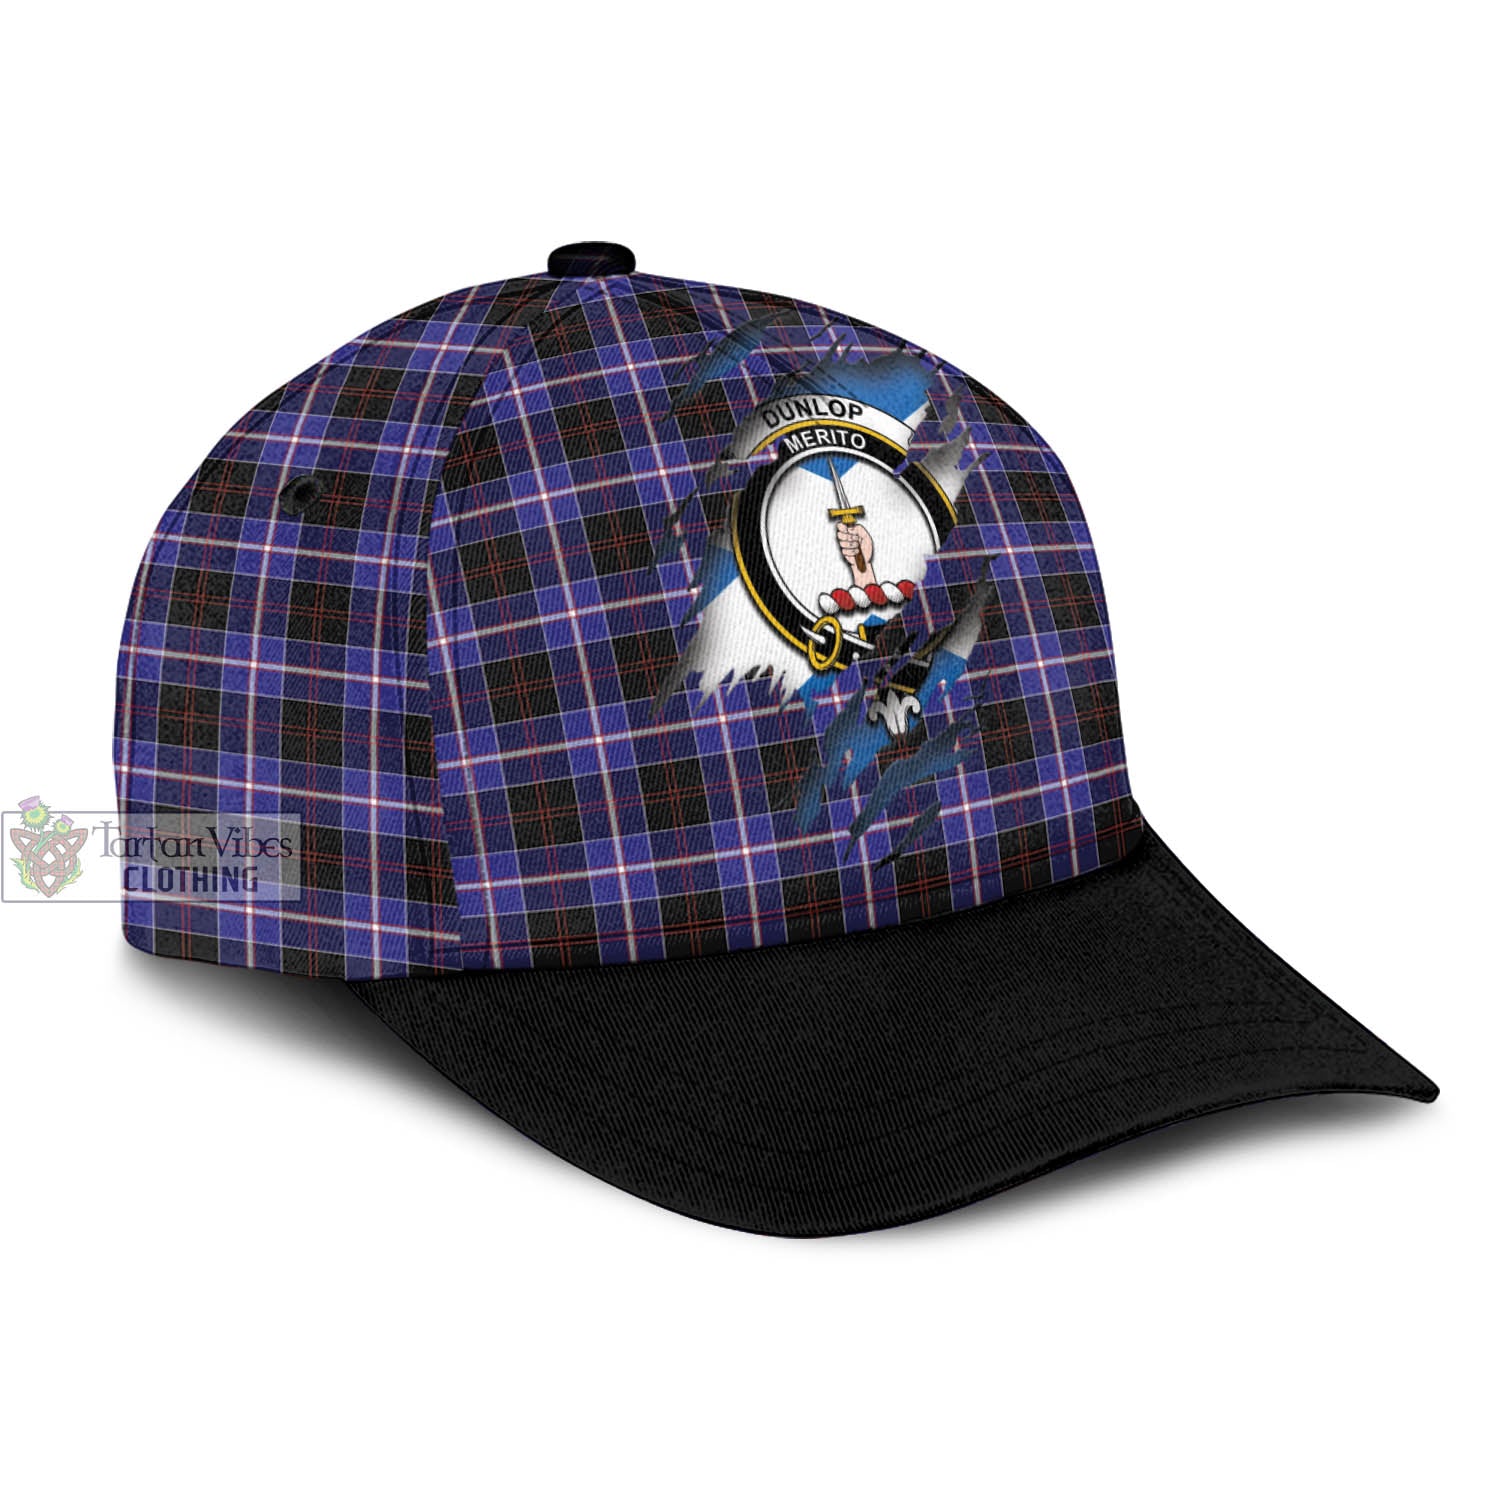 Tartan Vibes Clothing Dunlop Modern Tartan Classic Cap with Family Crest In Me Style